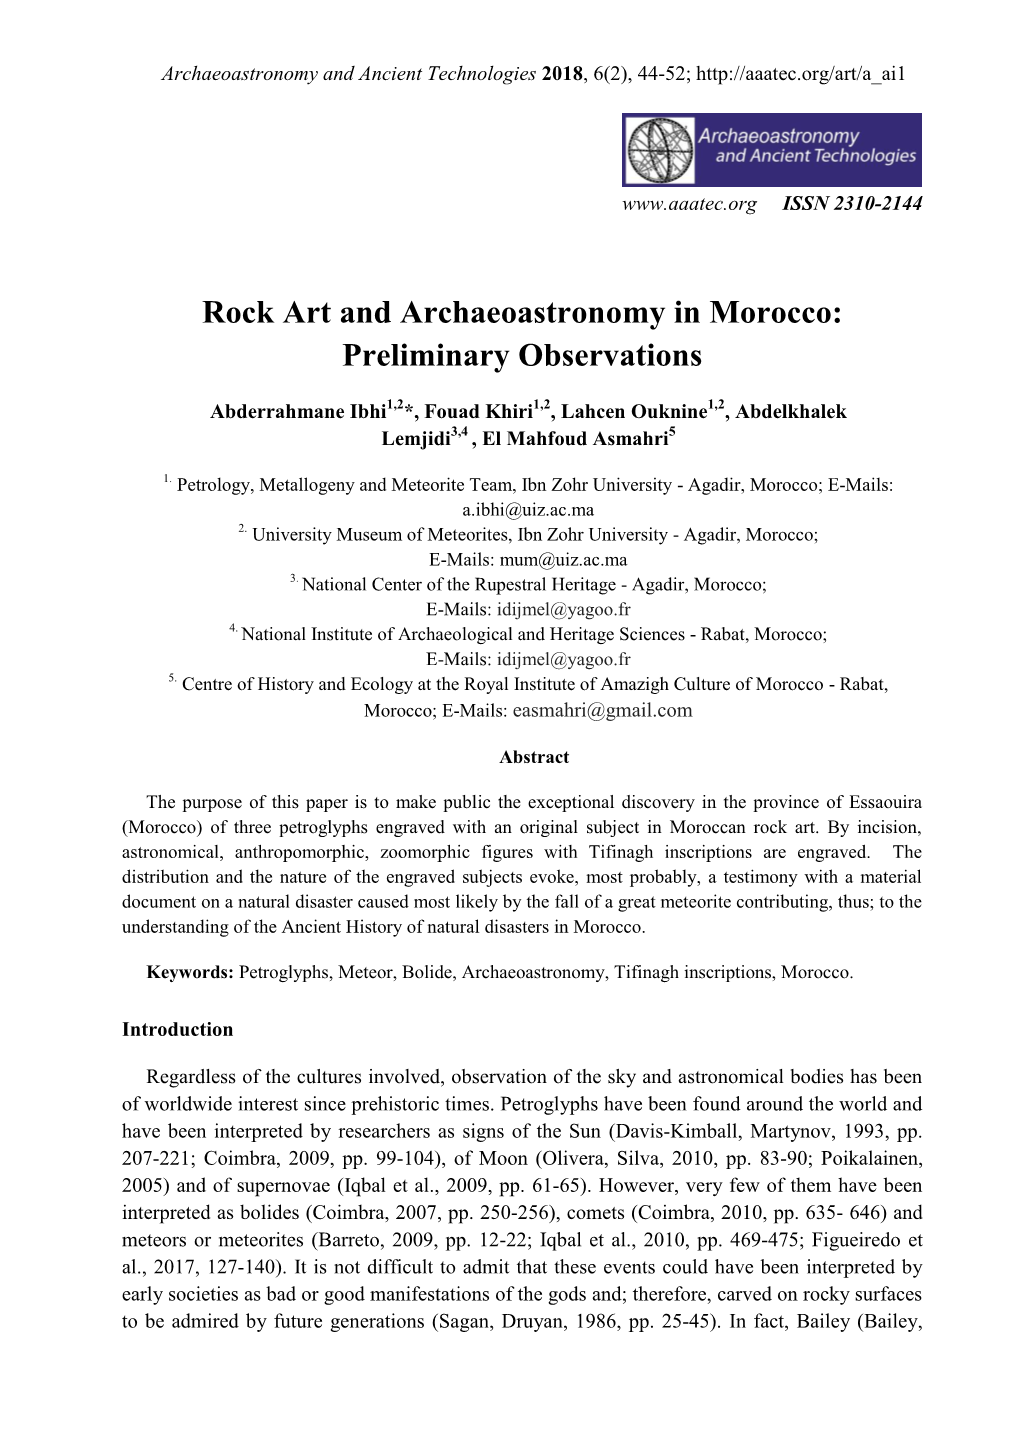 Rock Art and Archaeoastronomy in Morocco: Preliminary Observations